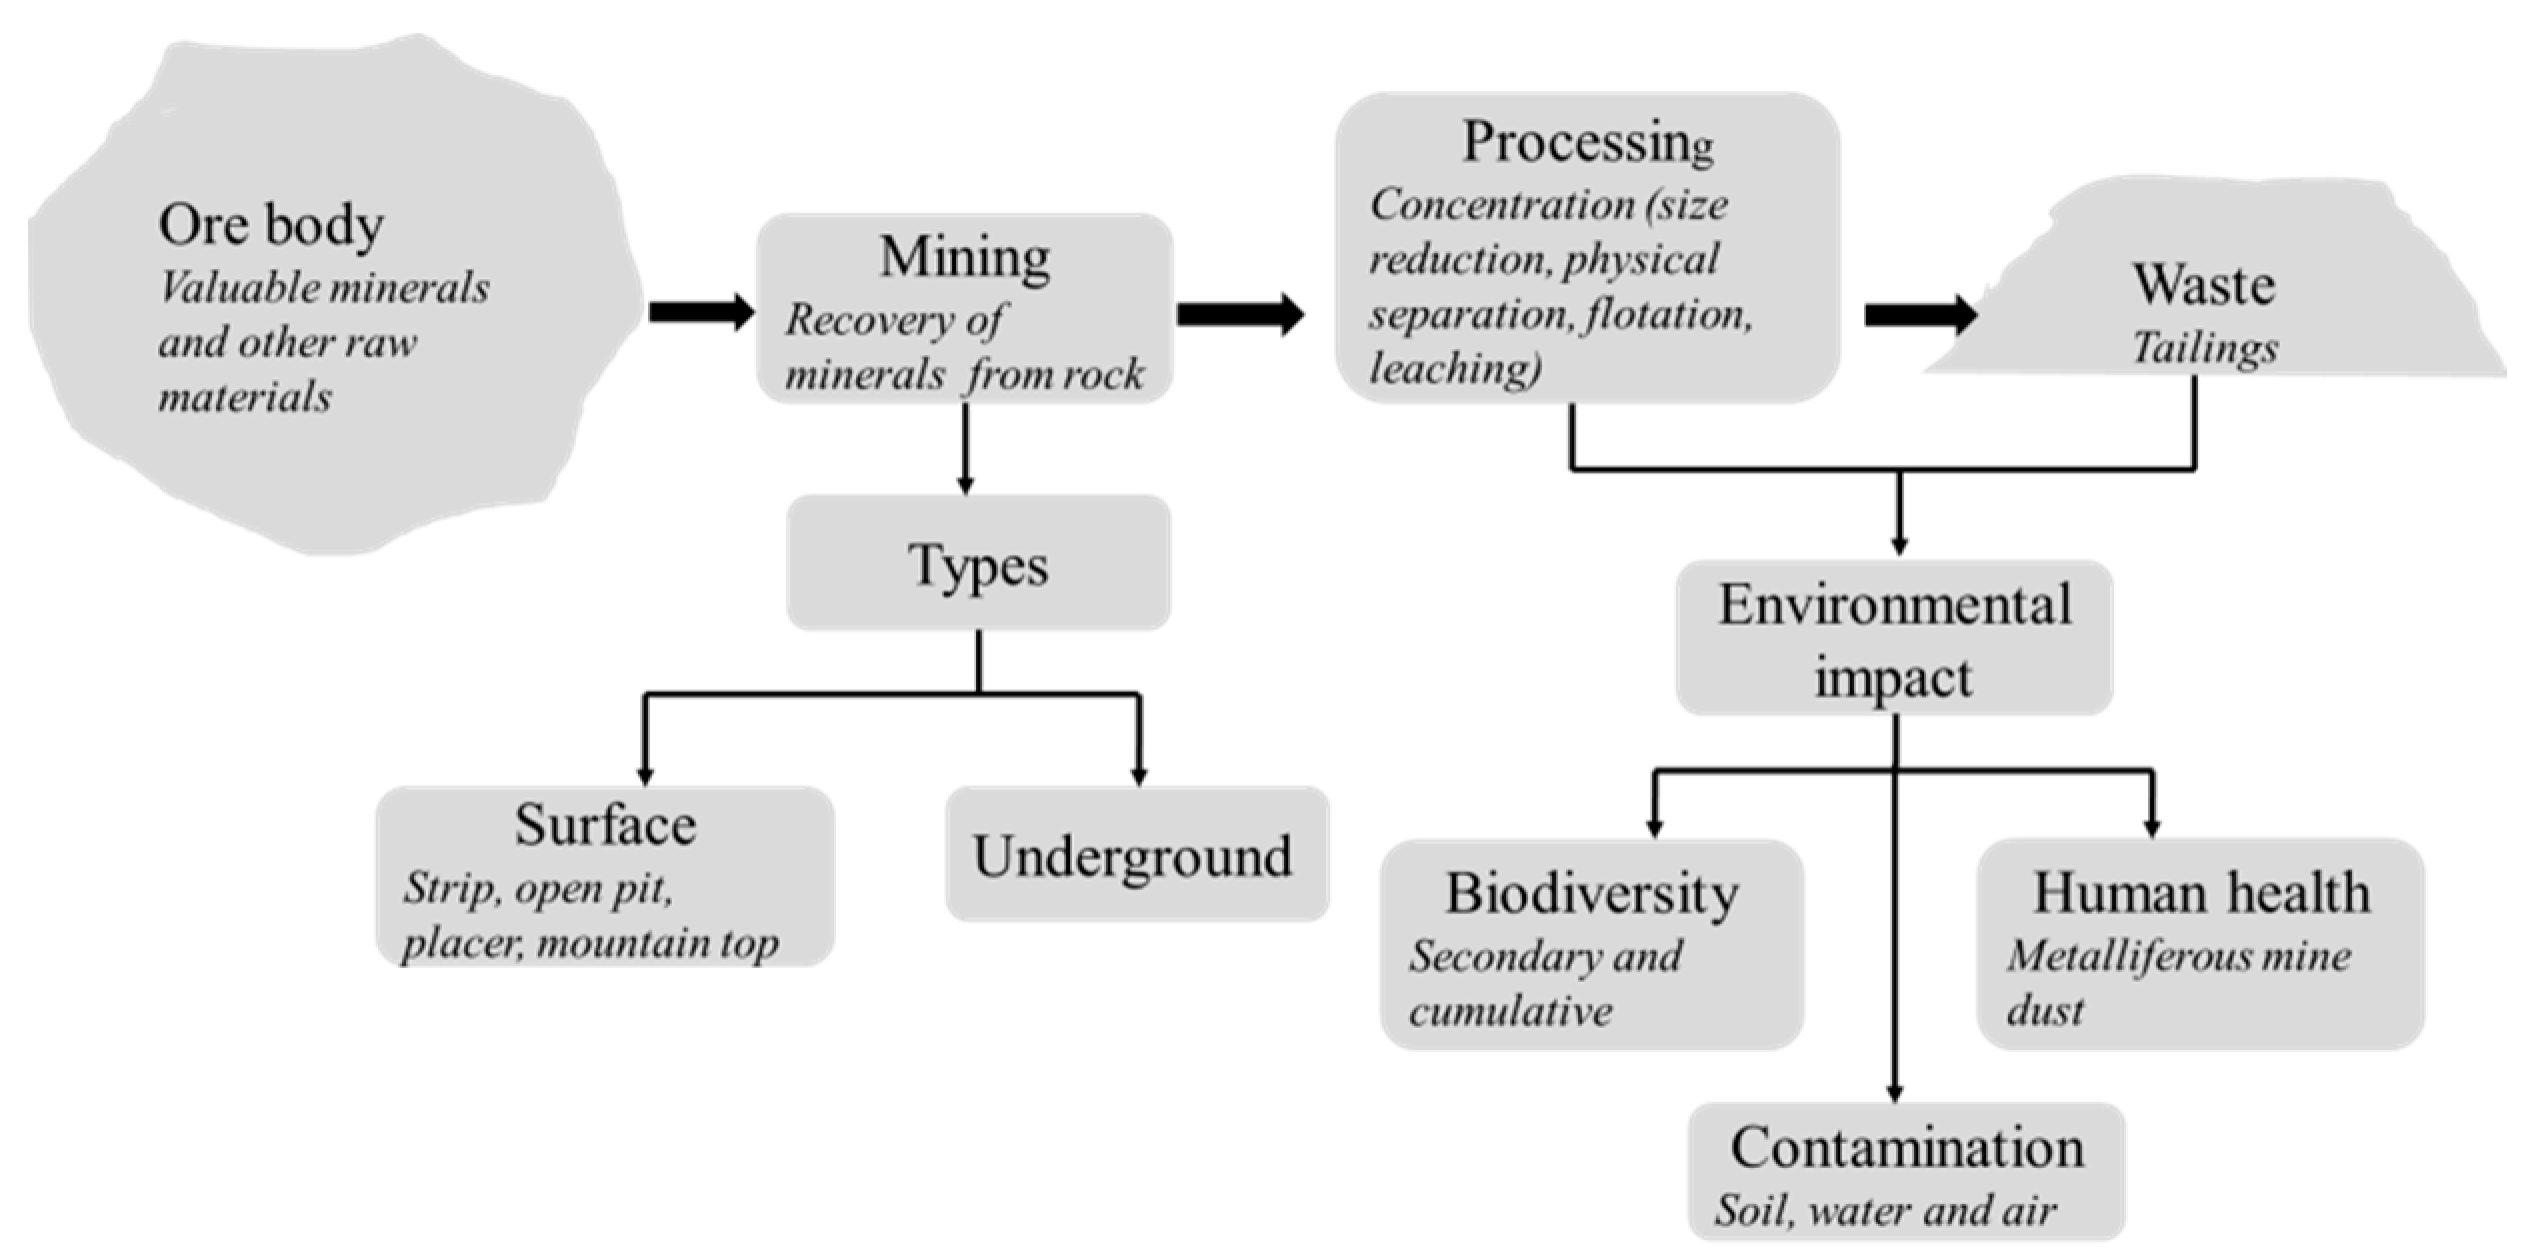 Online Ore Mineral Chart